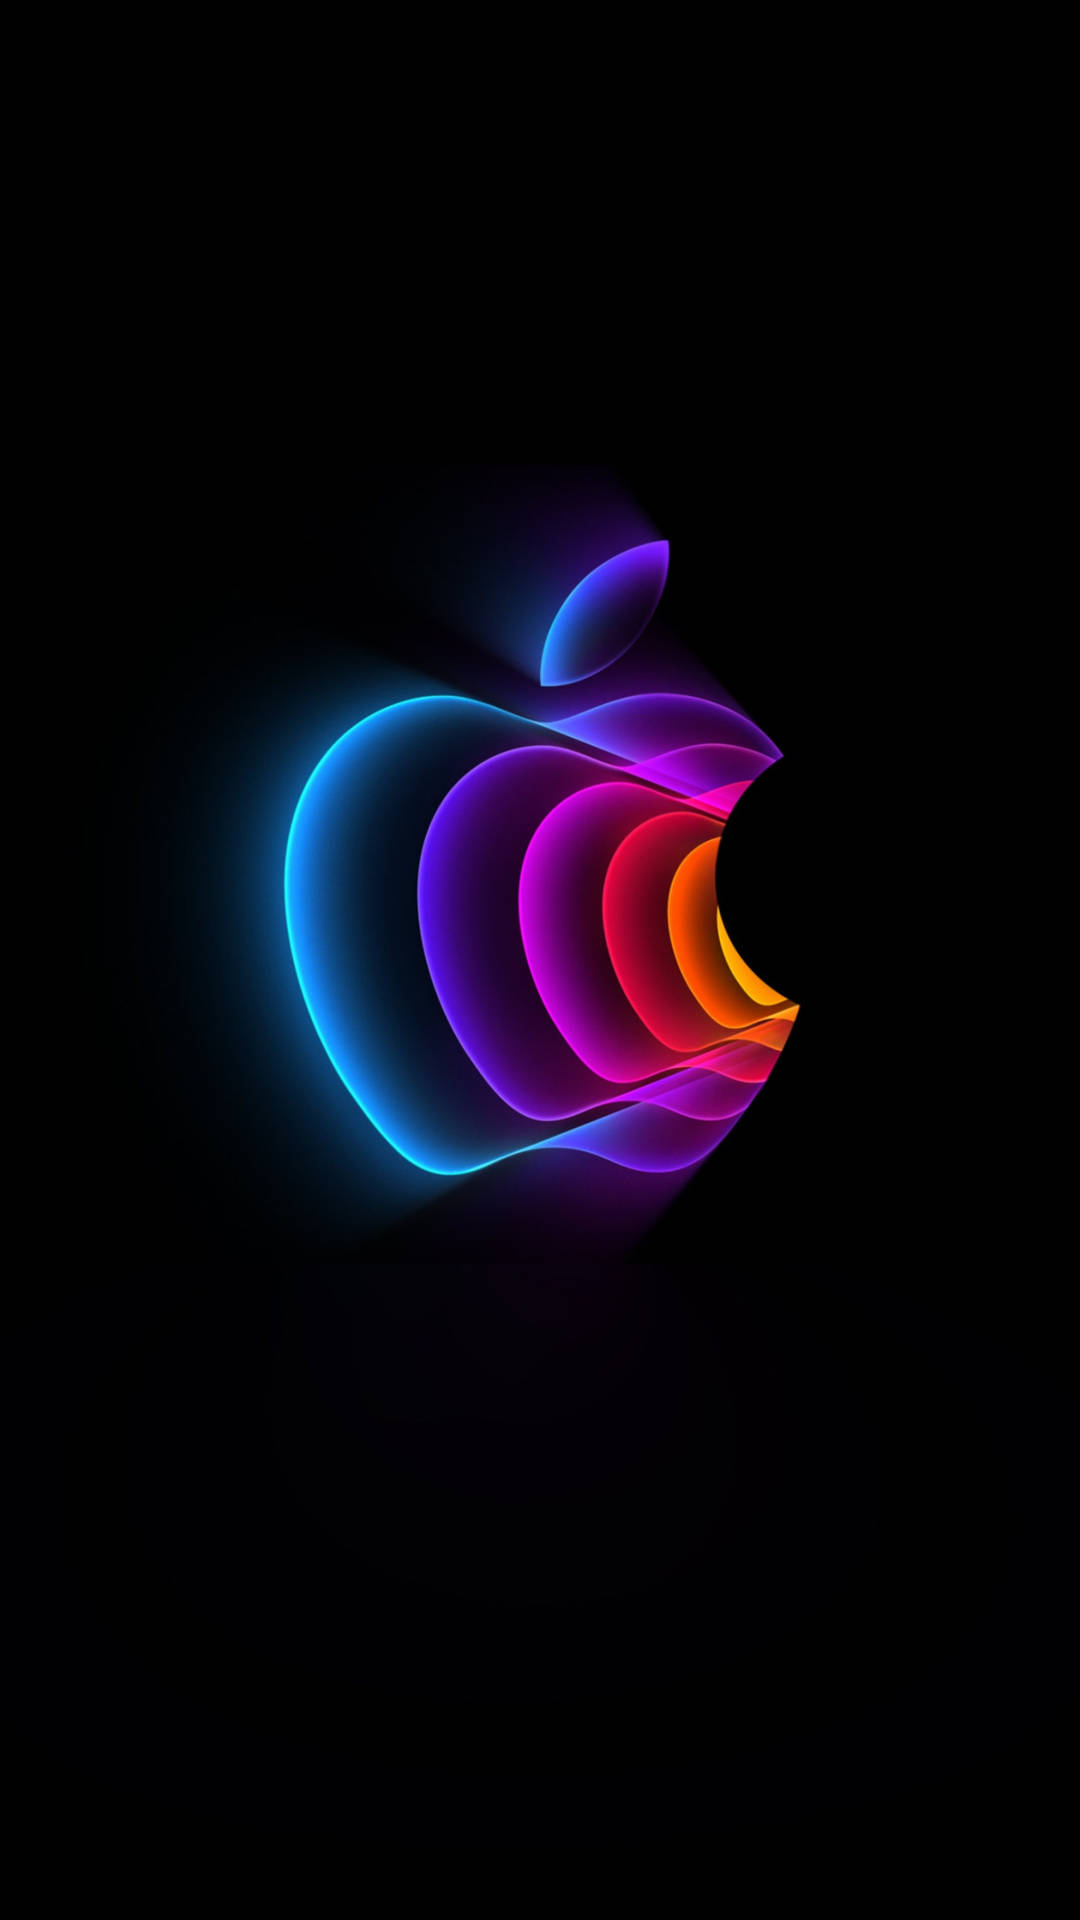 Vibrant Apple Logo Embraced By Solid Black Background